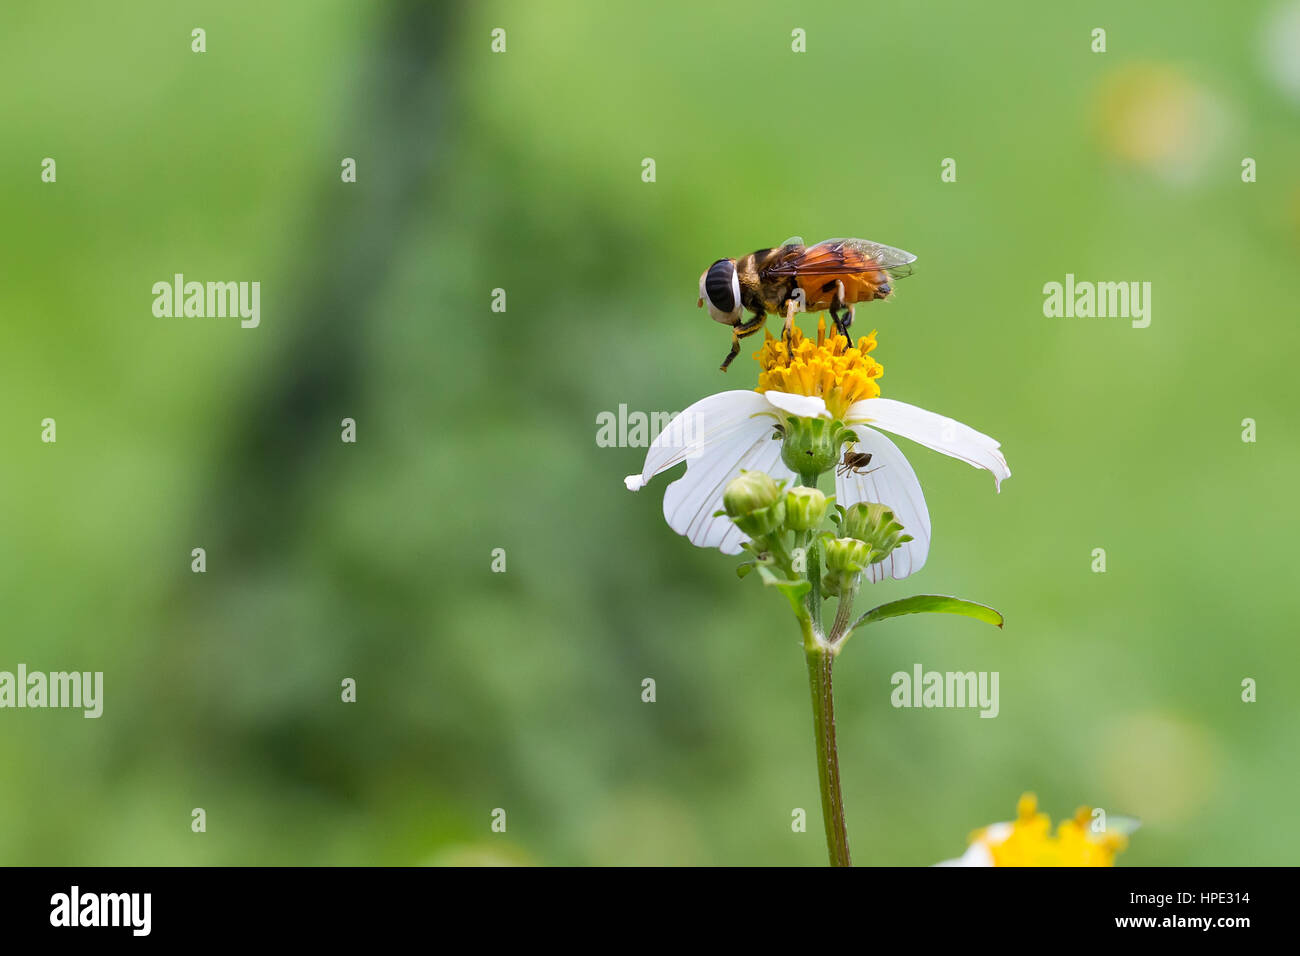 Tridax wide shield hoverfly flying with green background Stock Photo